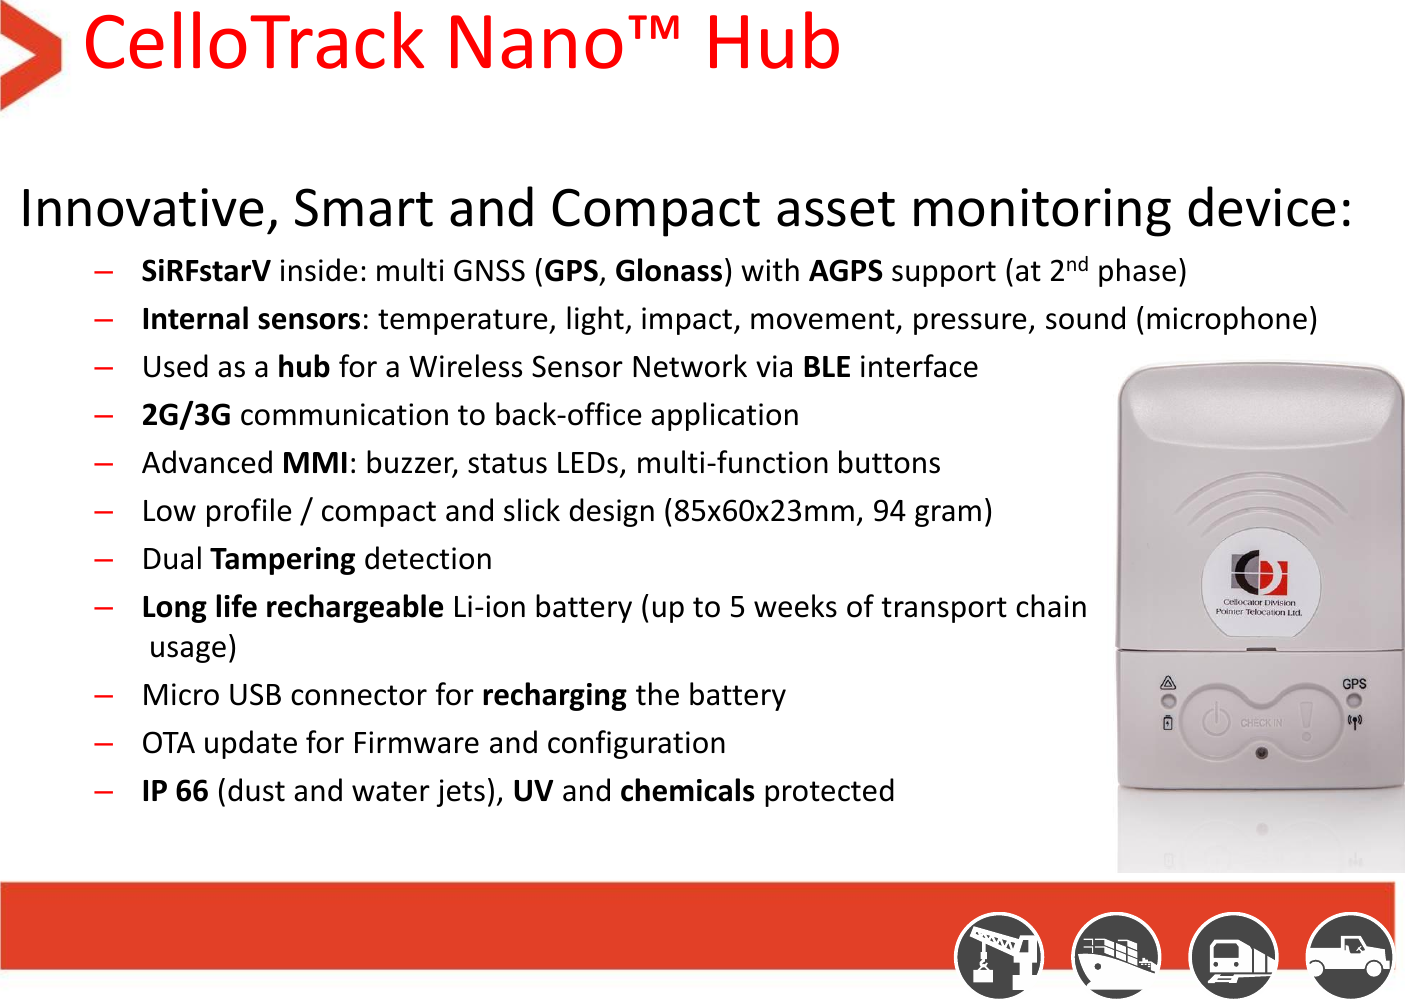 CelloTrack Nano™ Hub Innovative, Smart and Compact asset monitoring device: –SiRFstarV inside: multi GNSS (GPS, Glonass) with AGPS support (at 2nd phase) –Internal sensors: temperature, light, impact, movement, pressure, sound (microphone) –Used as a hub for a Wireless Sensor Network via BLE interface –2G/3G communication to back-office application –Advanced MMI: buzzer, status LEDs, multi-function buttons –Low profile / compact and slick design (85x60x23mm, 94 gram)  –Dual Tampering detection –Long life rechargeable Li-ion battery (up to 5 weeks of transport chain  usage) –Micro USB connector for recharging the battery –OTA update for Firmware and configuration –IP 66 (dust and water jets), UV and chemicals protected 